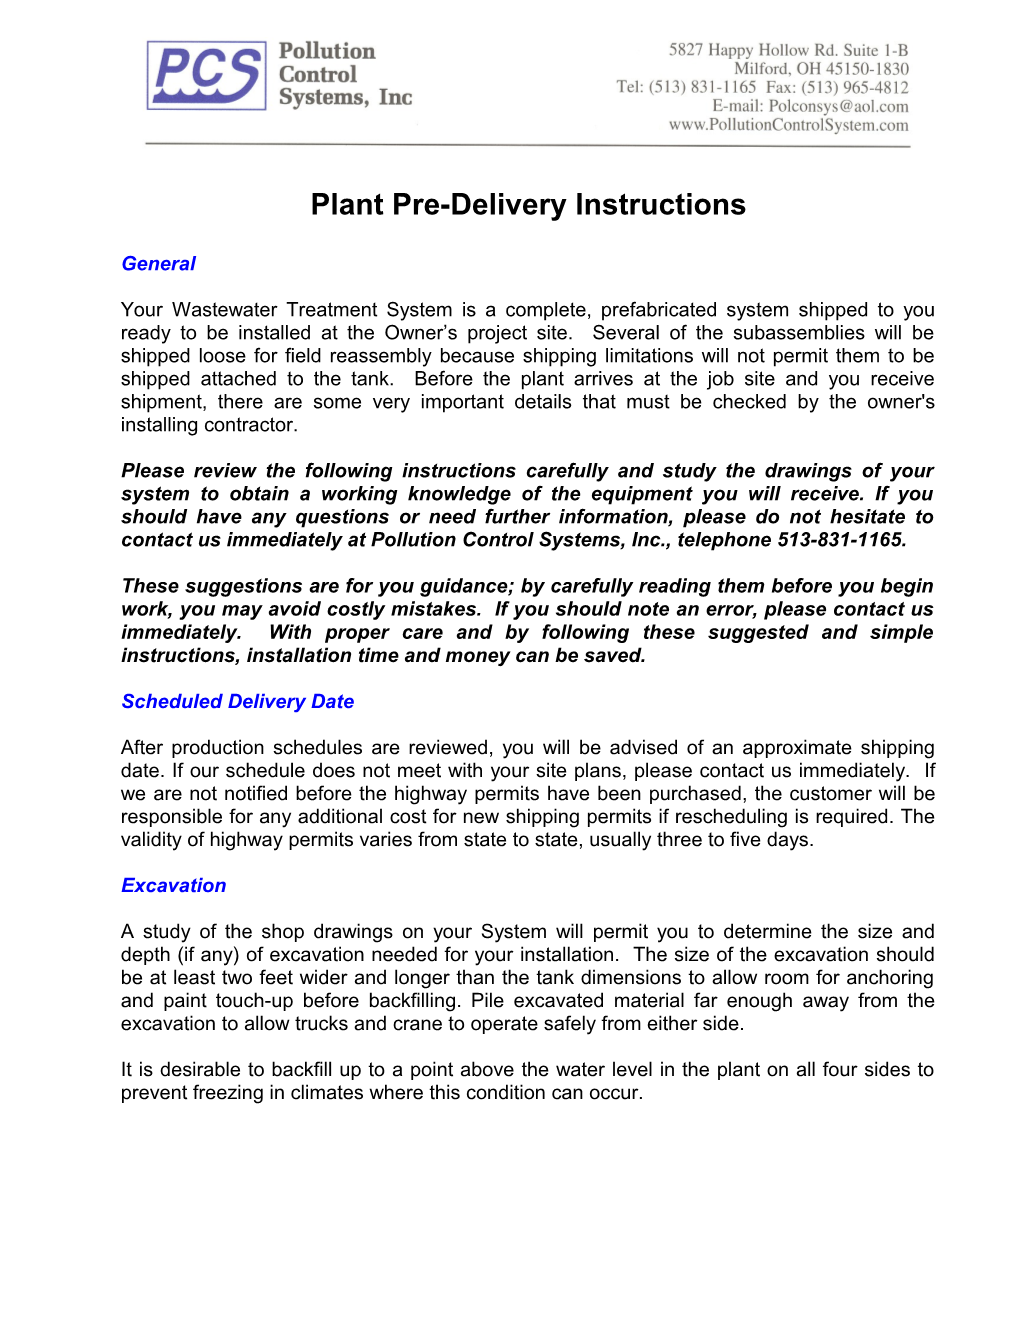 Plant Pre-Delivery Instructions